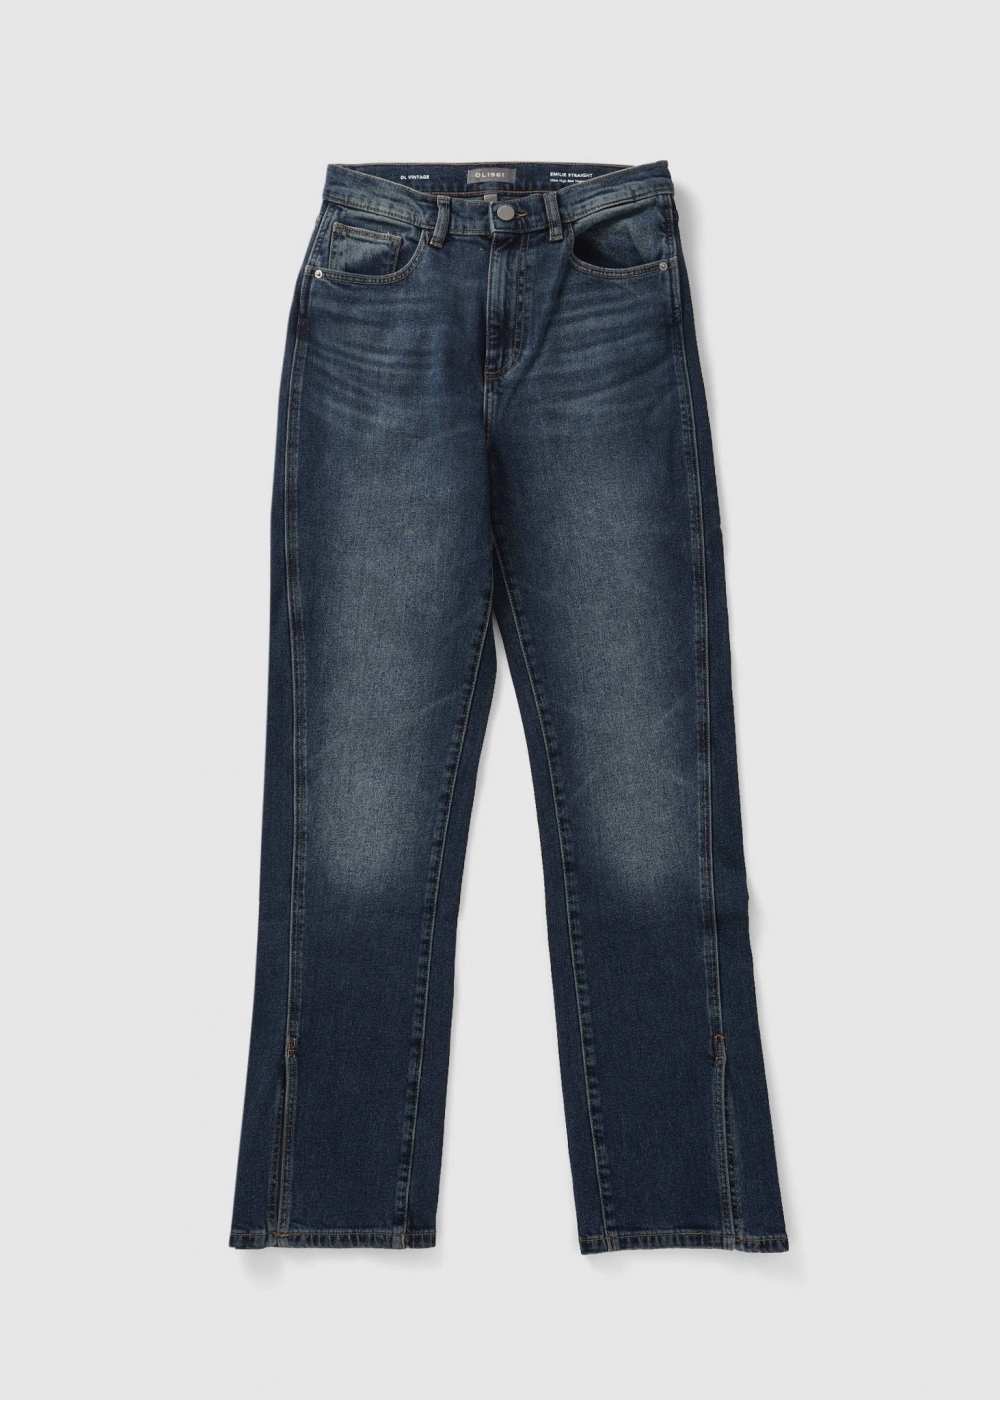 DL1961 Dl1961 Womens Emilie Straight Ultra High Rise Vintage 31' Jeans In Thundercloud